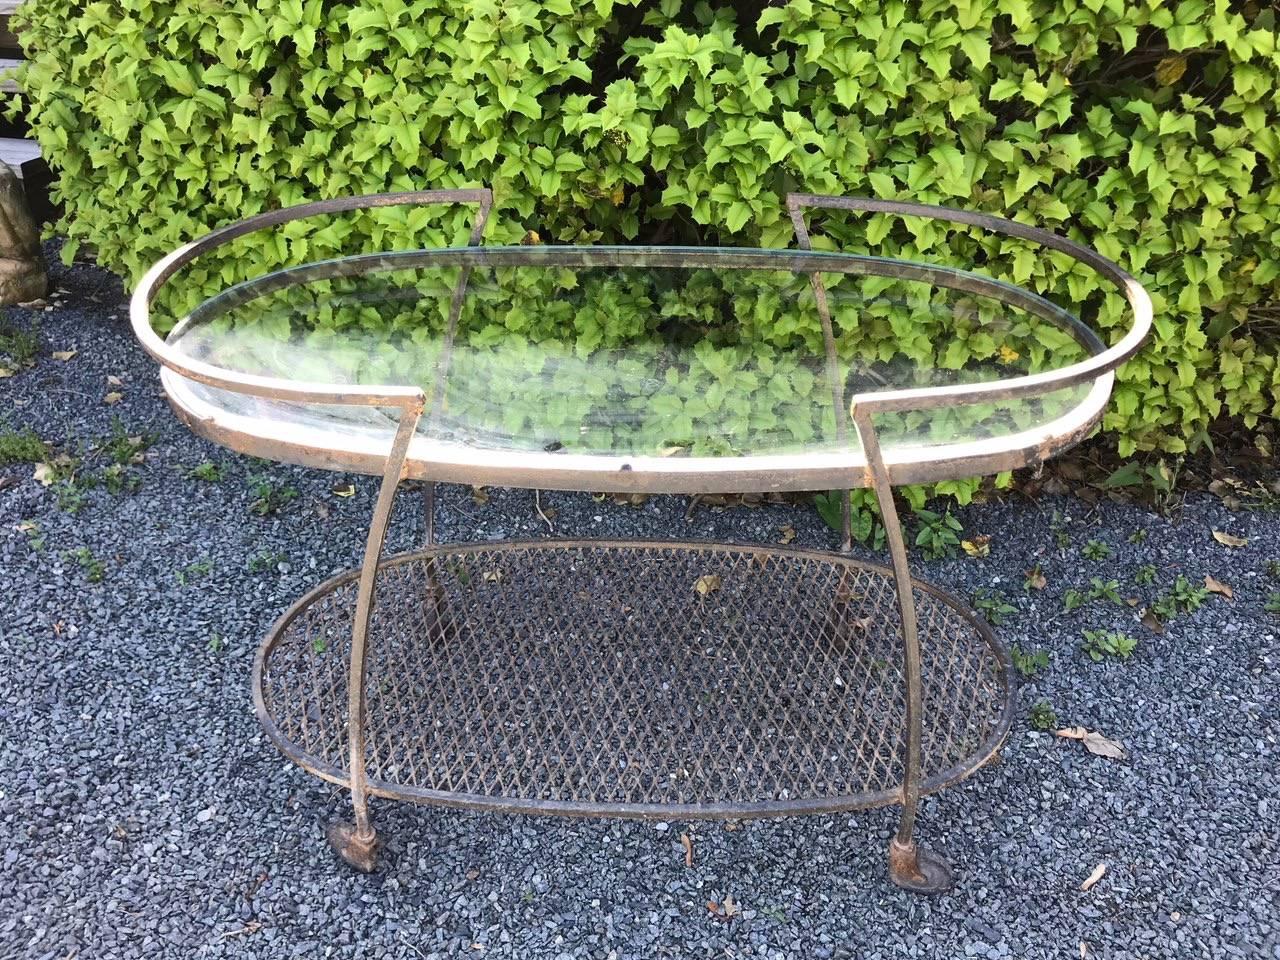 A vintage Woodard wrought iron bar cart by Woodard, having new glass top tier and a lattice iron bottom tier, on wheels for easy moving. Great for the outside deck or patio.
Table has been left in original slightly rusty condition, great bones but